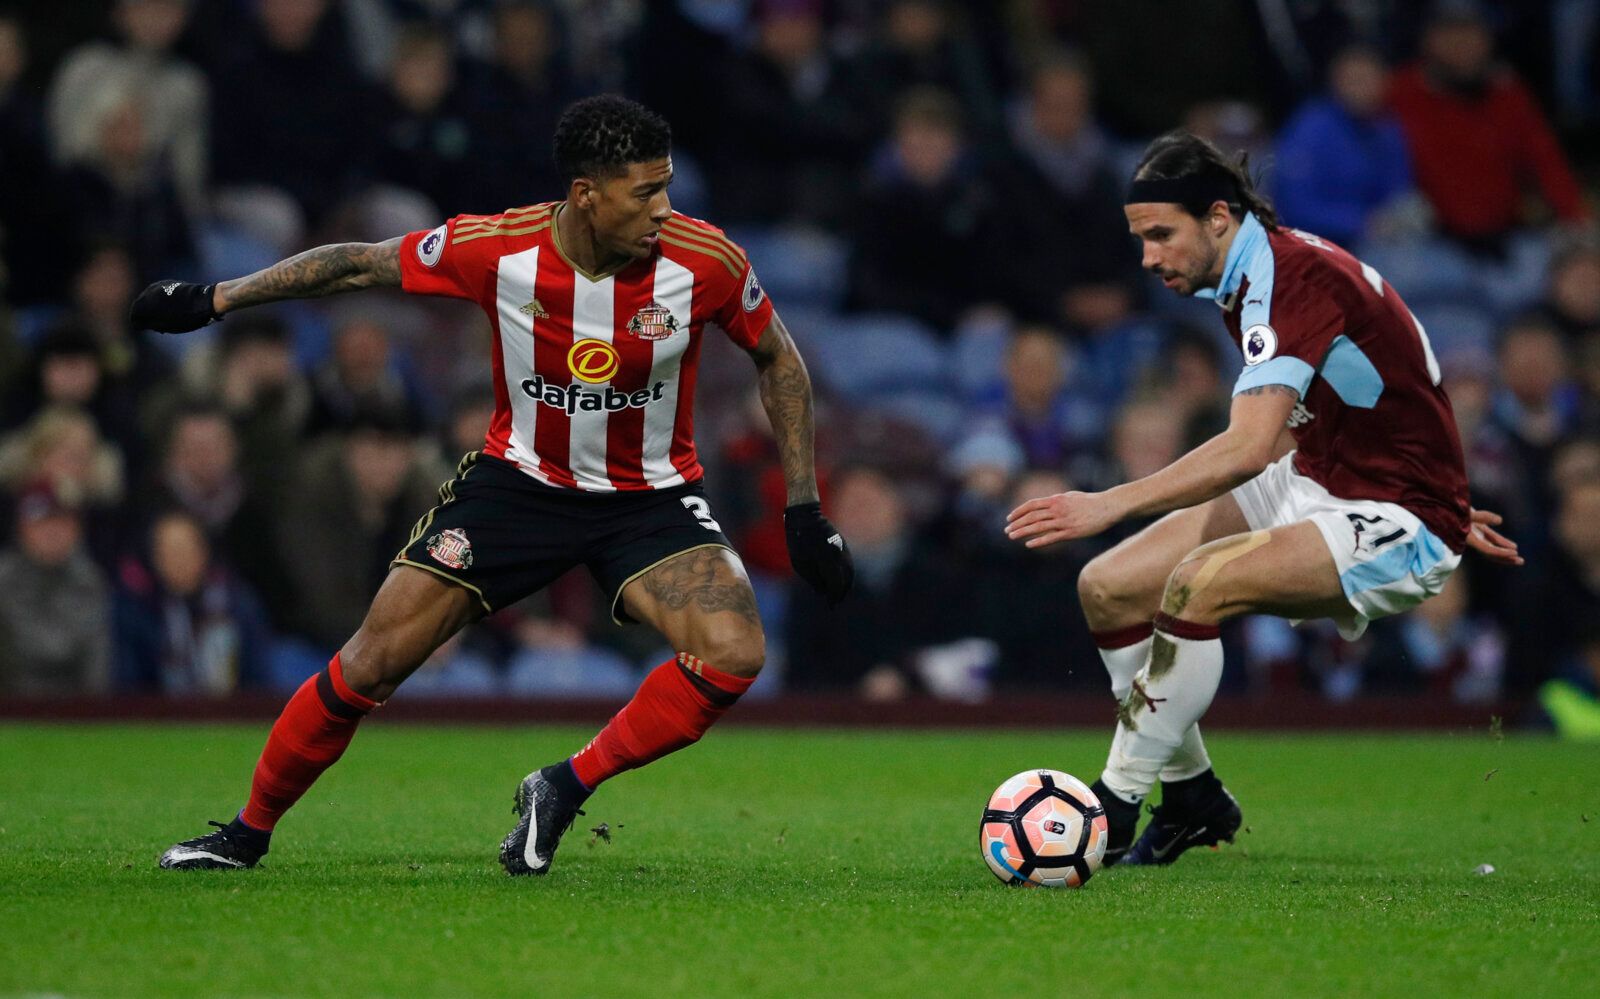 Britain Football Soccer - Burnley v Sunderland - FA Cup Third Round Replay - Turf Moor - 17/1/17 Sunderland's Patrick van Aanholt in action with Burnley's George Boyd  Reuters / Phil Noble Livepic EDITORIAL USE ONLY. No use with unauthorized audio, video, data, fixture lists, club/league logos or 